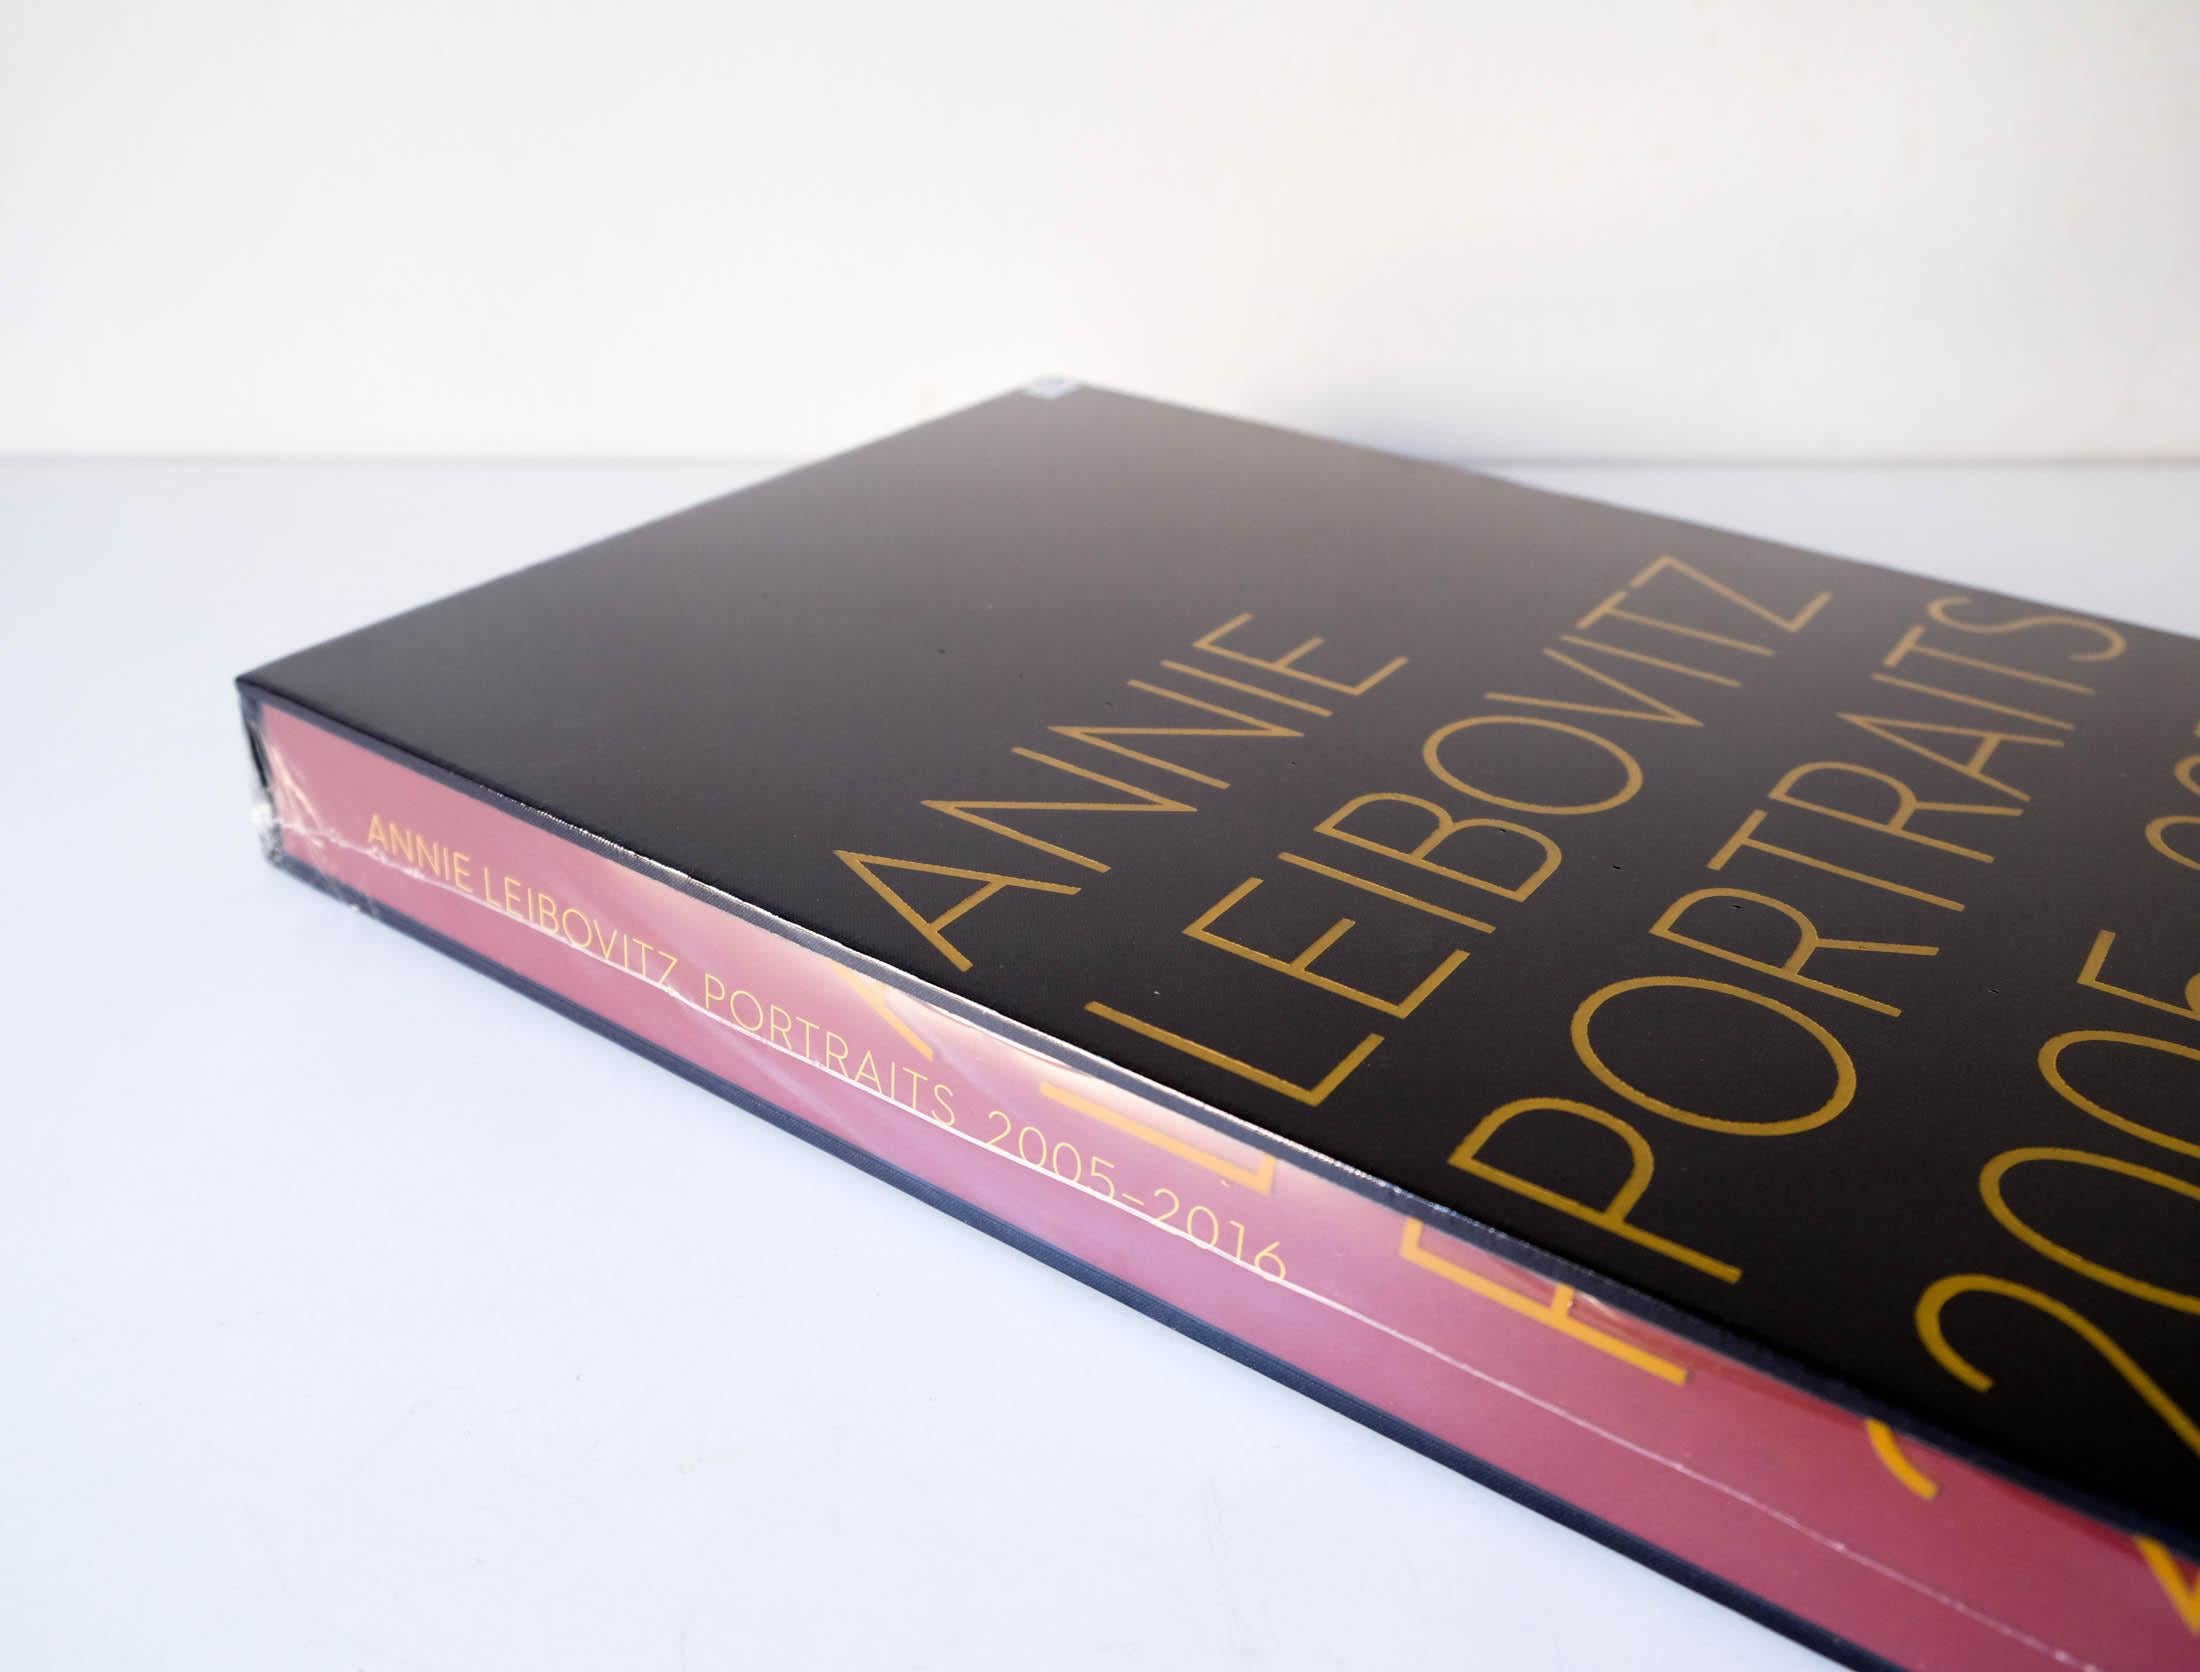 Linen Rare Limited Edition Signed Annie Leibovitz, Portraits 2005-2016 Book, Phaidon 2 For Sale